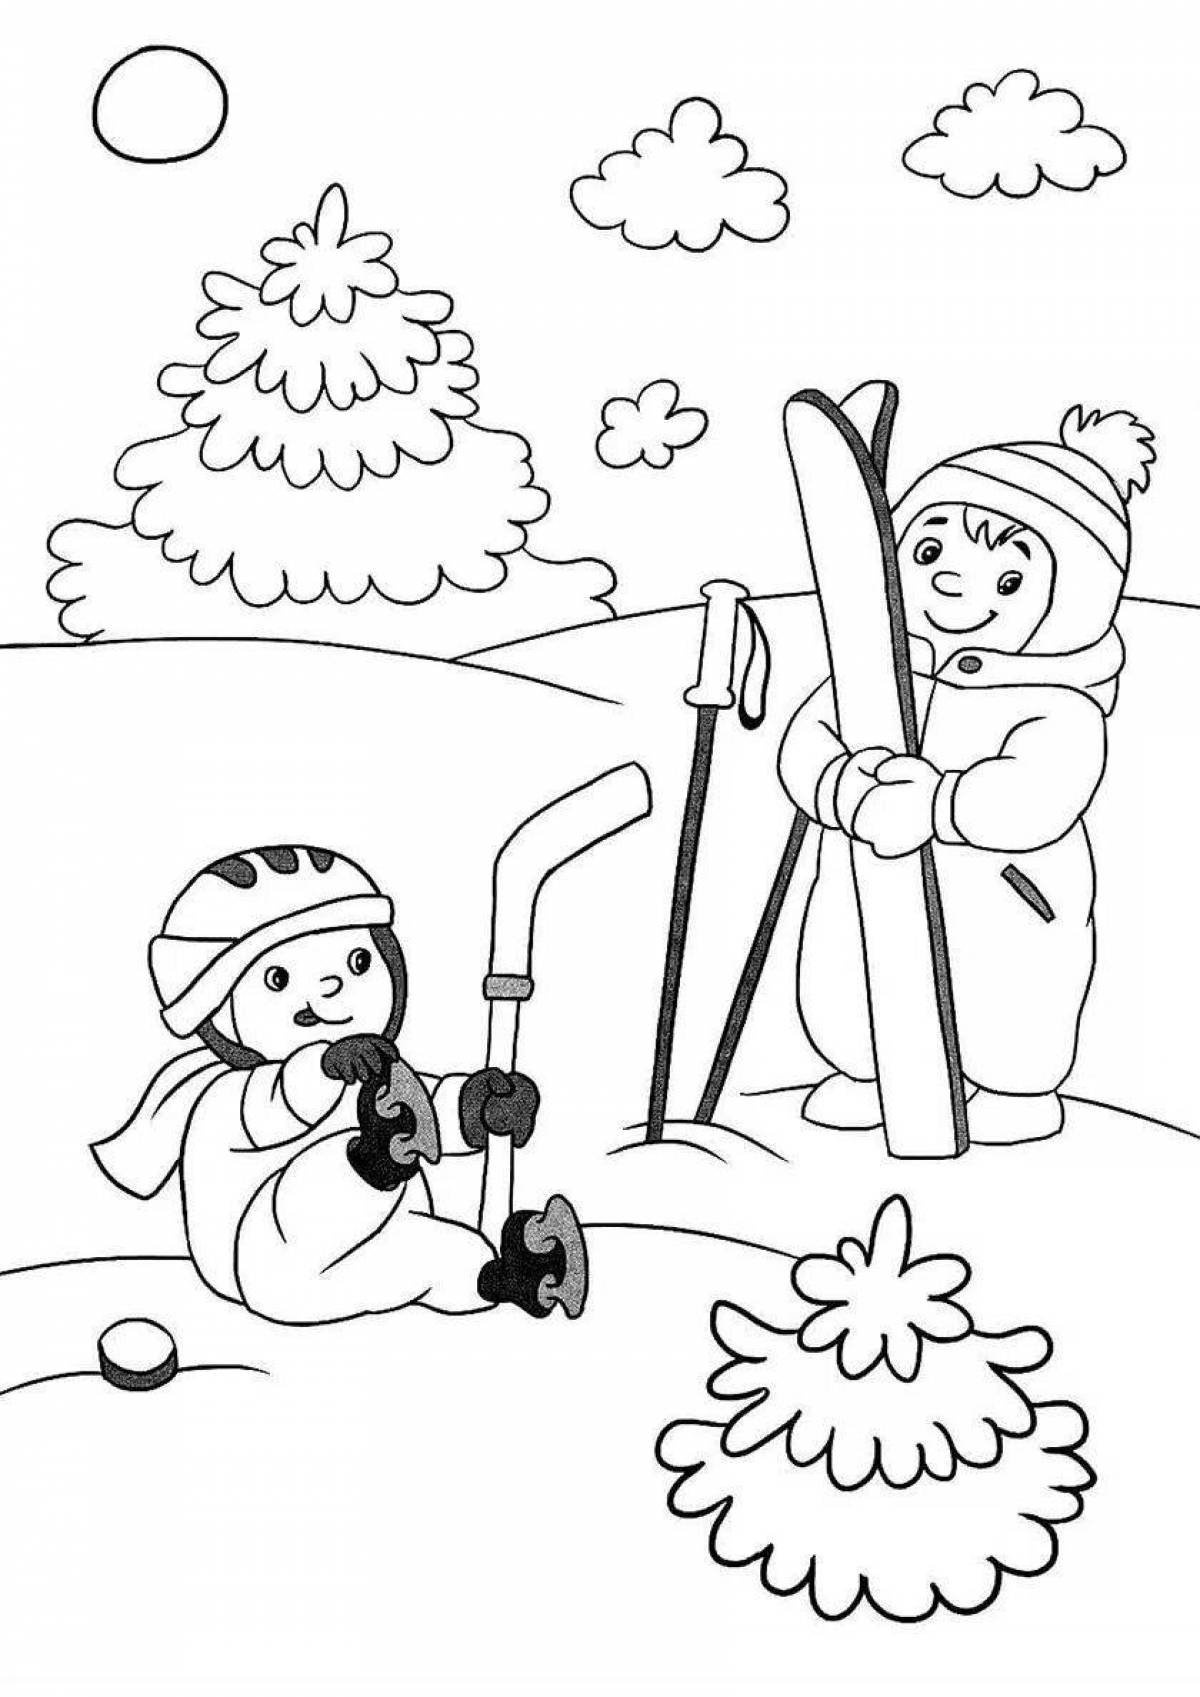 Color-frenzy children's fun coloring page